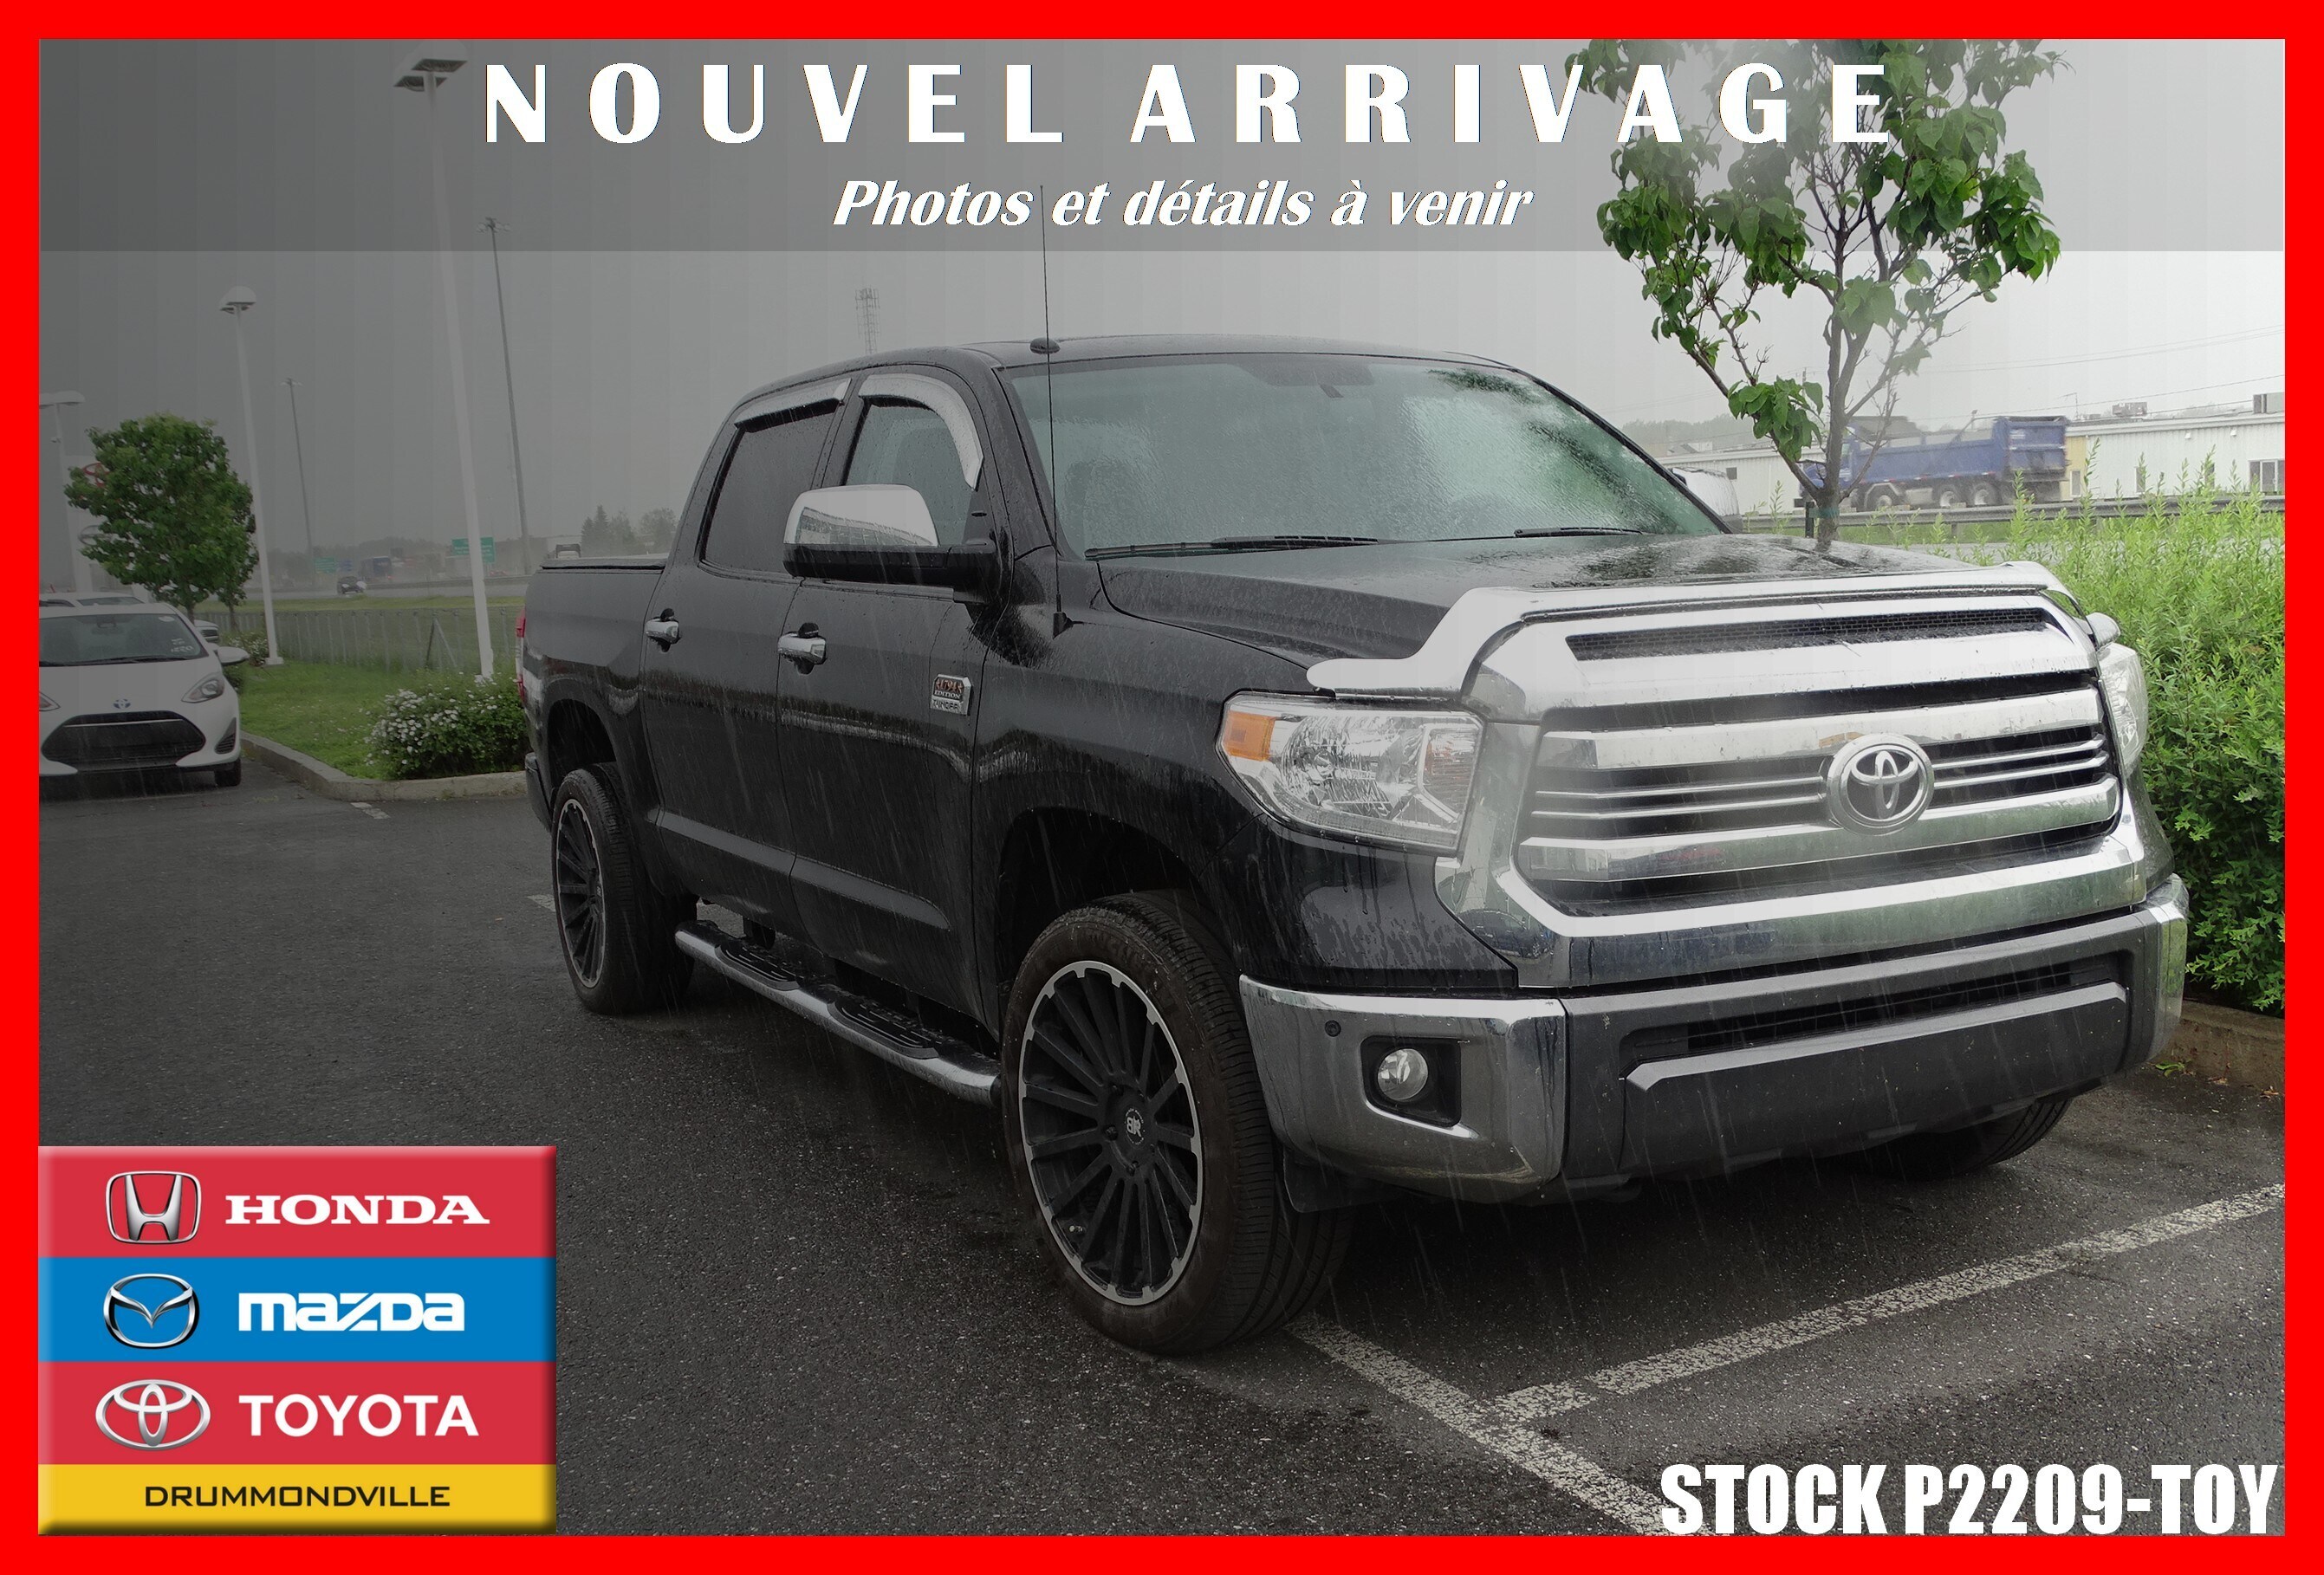  Toyota Tundra PACK éDITION 